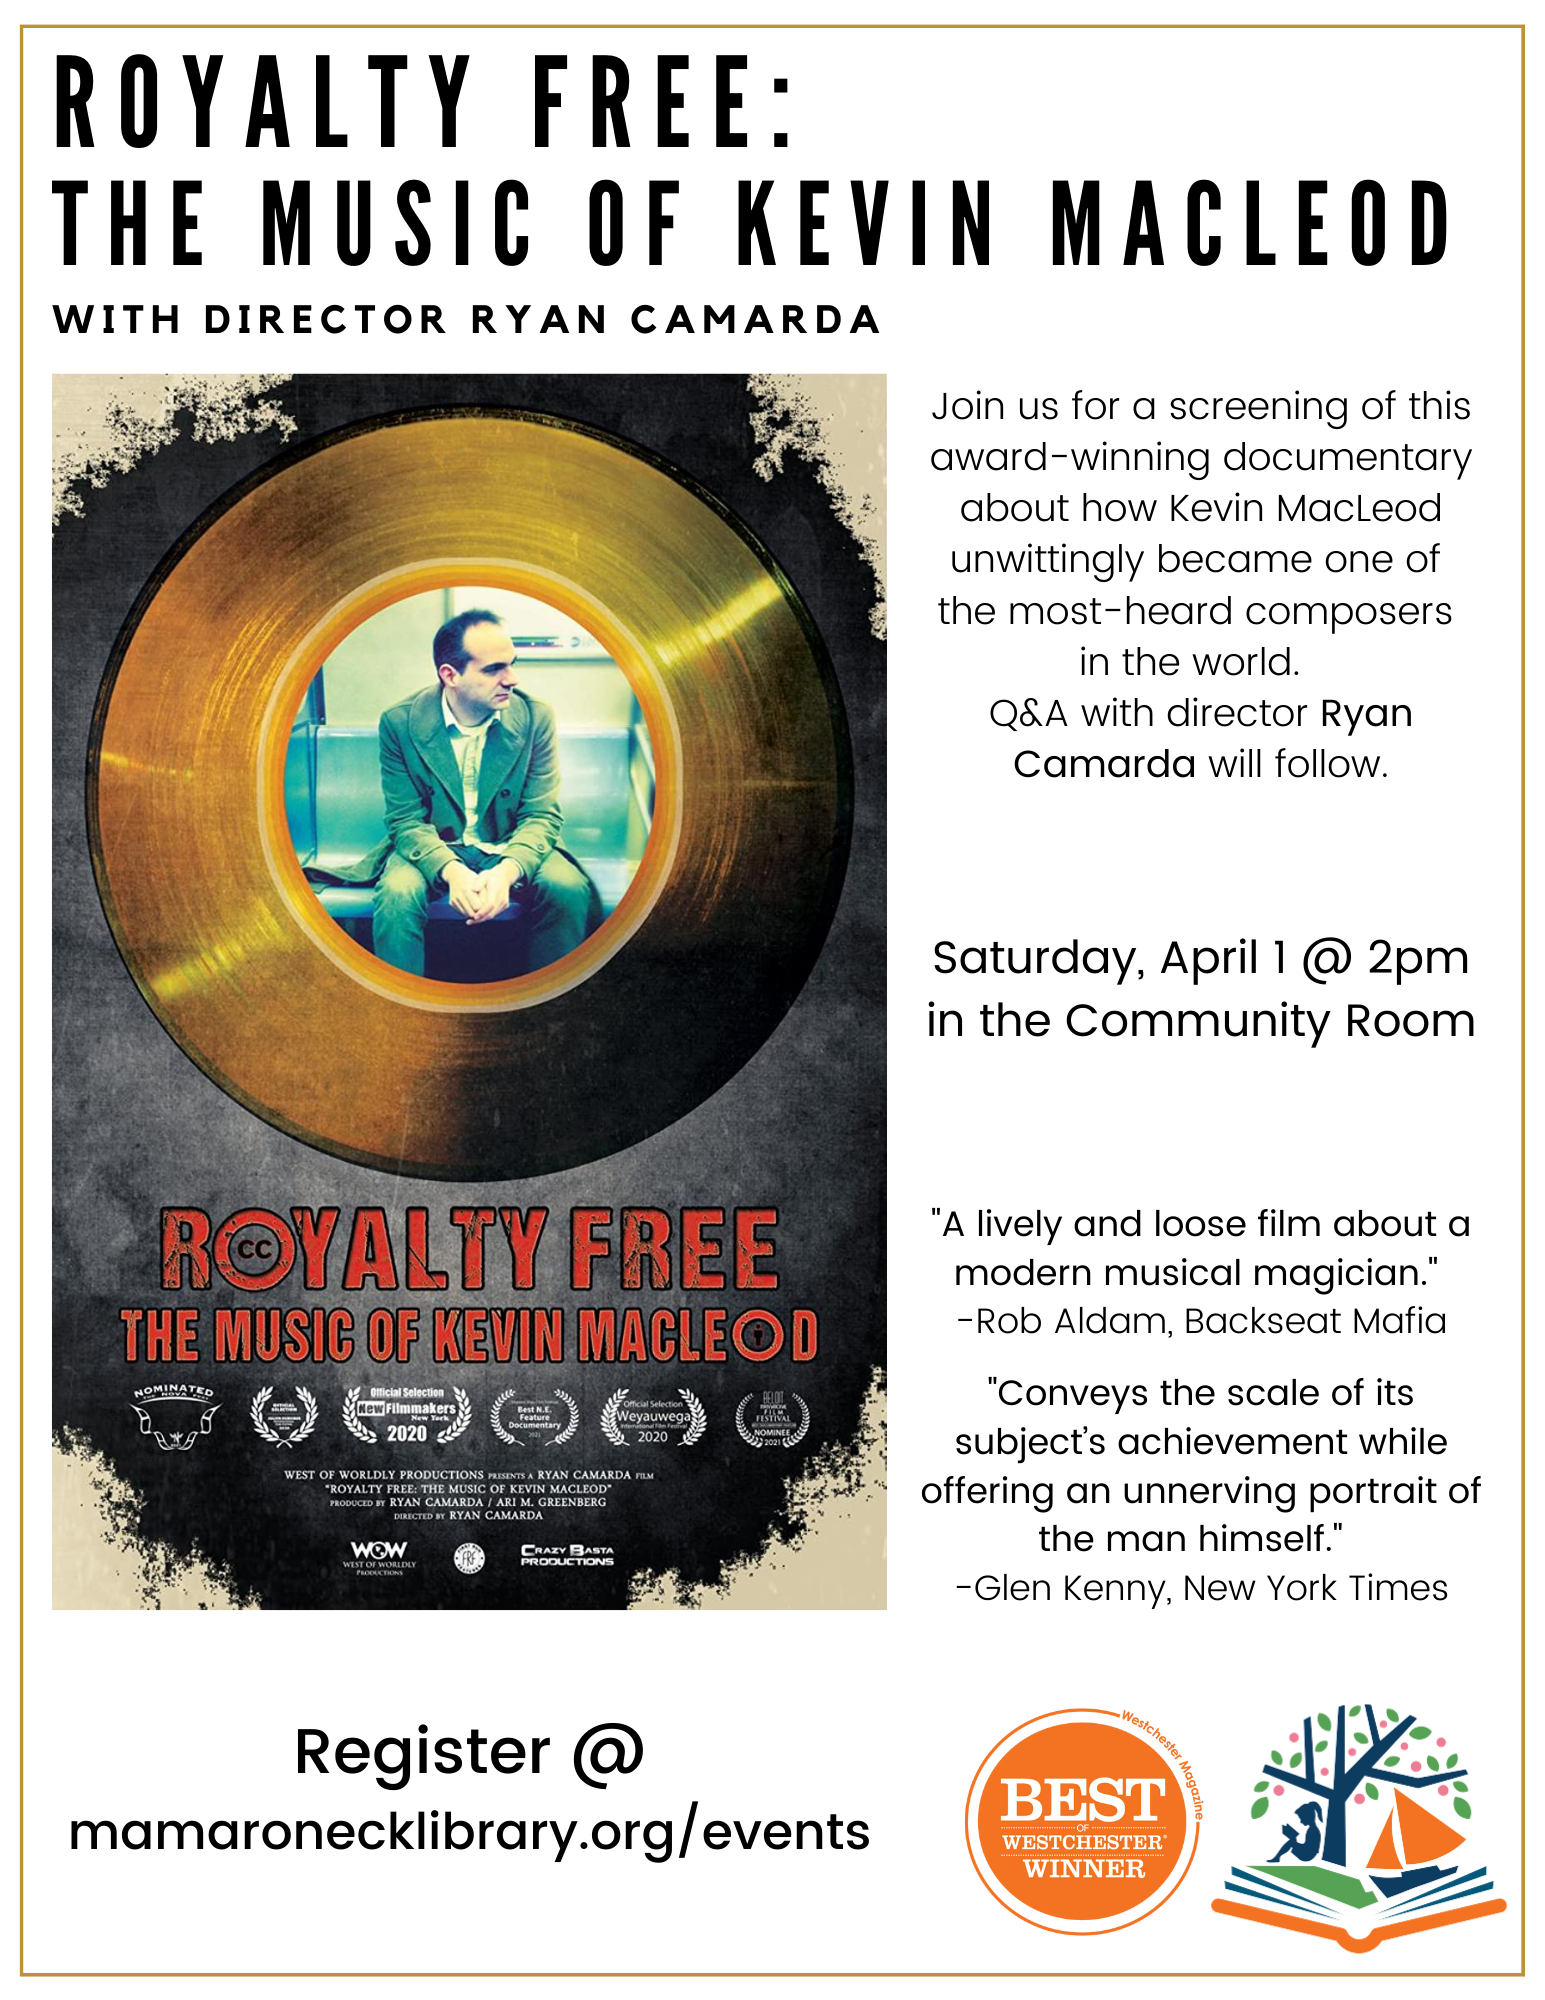 4/1 @ 2pm in the Community Room: Free screening of film documentary: Royalty Free